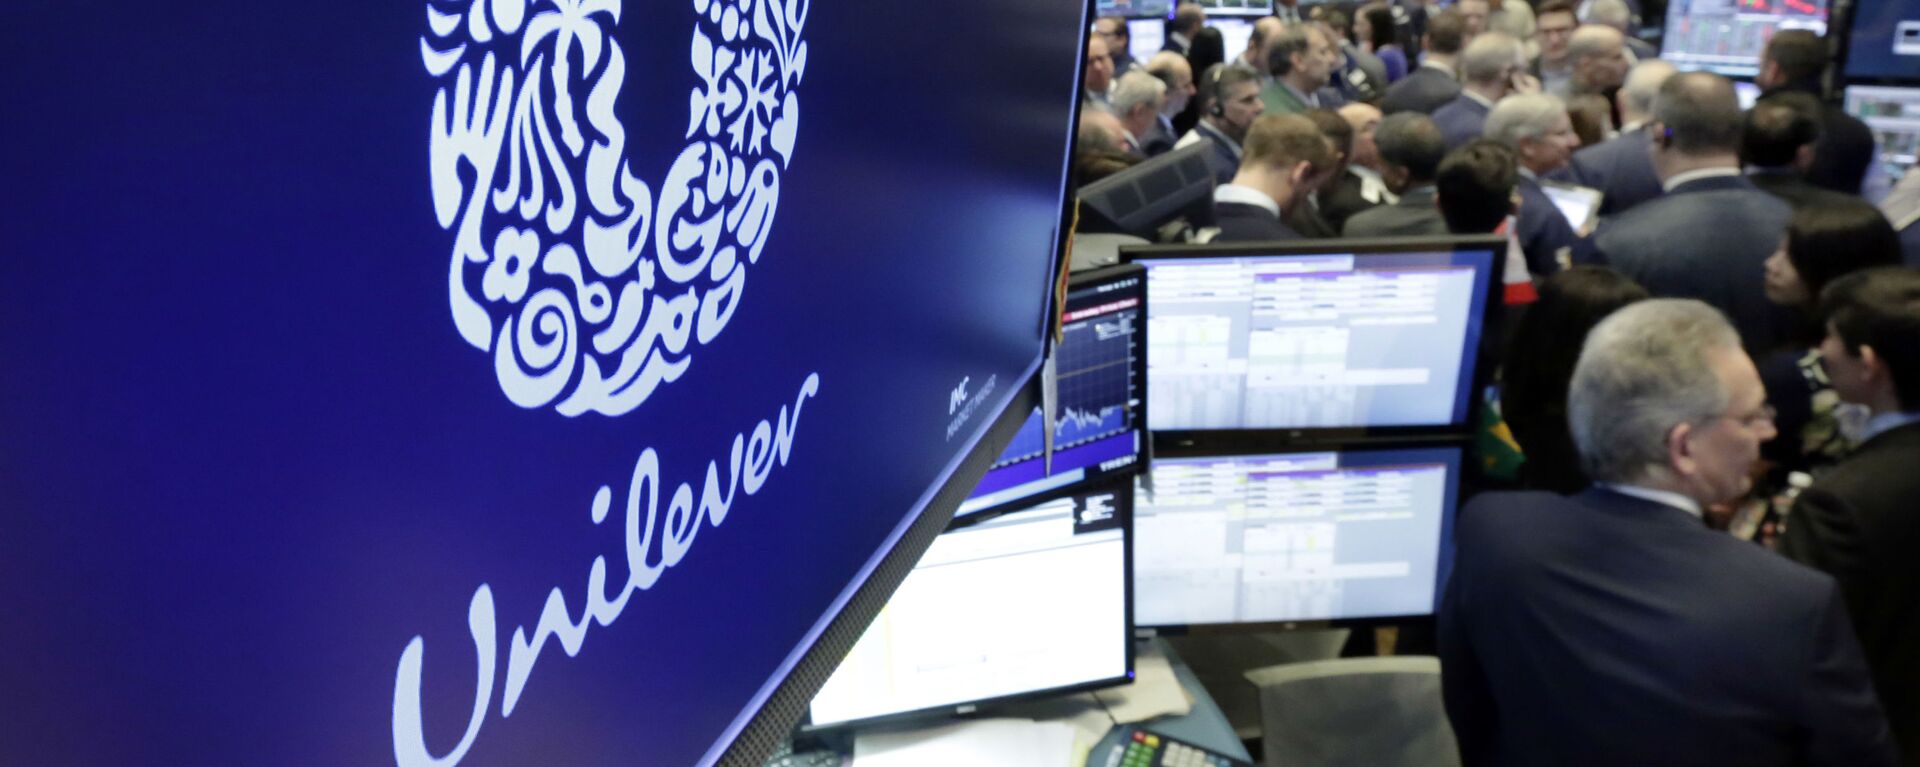 FILE - In this Thursday, March 15, 2018 file photo, the logo for Unilever appears above a trading post on the floor of the New York Stock Exchange. Consumer products giant Unilever, said Thursday July 23, 2020, that second-quarter sales were only slightly lower than the same period a year ago despite the lockdown measures triggered by the global fight against the coronavirus. - Sputnik International, 1920, 23.07.2021